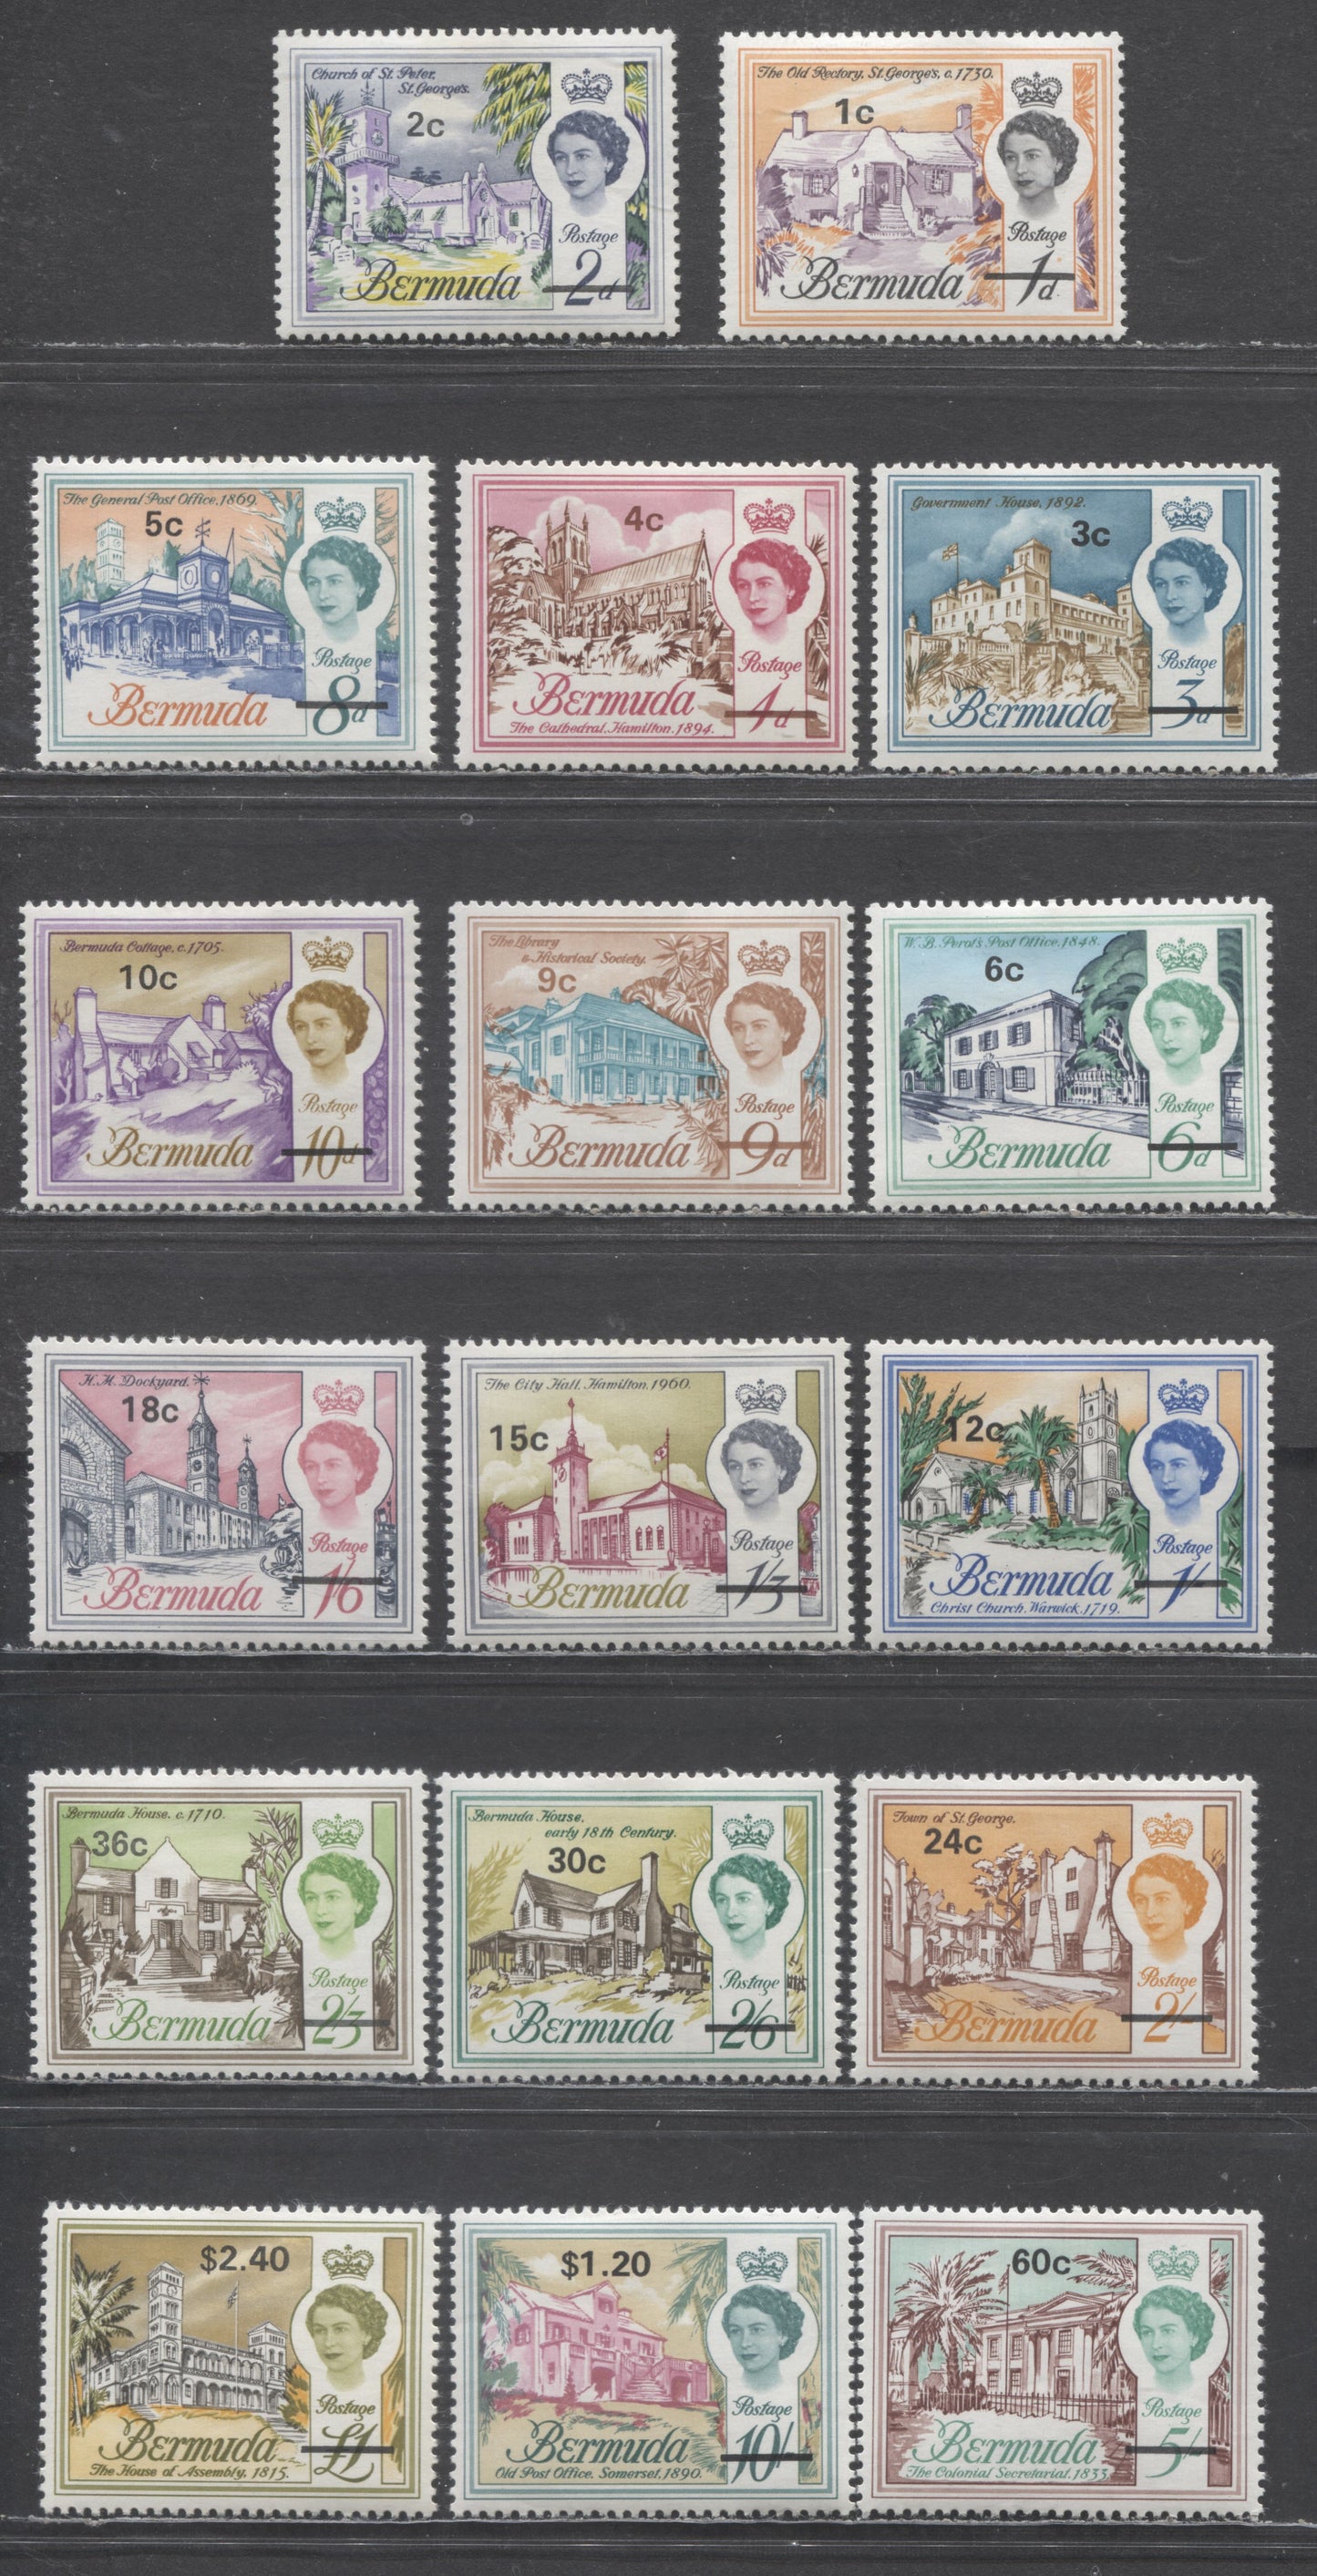 Lot 69 Bermuda SC#238-254 1970 Buildings Issue, 17 VFOG Singles, Click on Listing to See ALL Pictures, Estimated Value $15